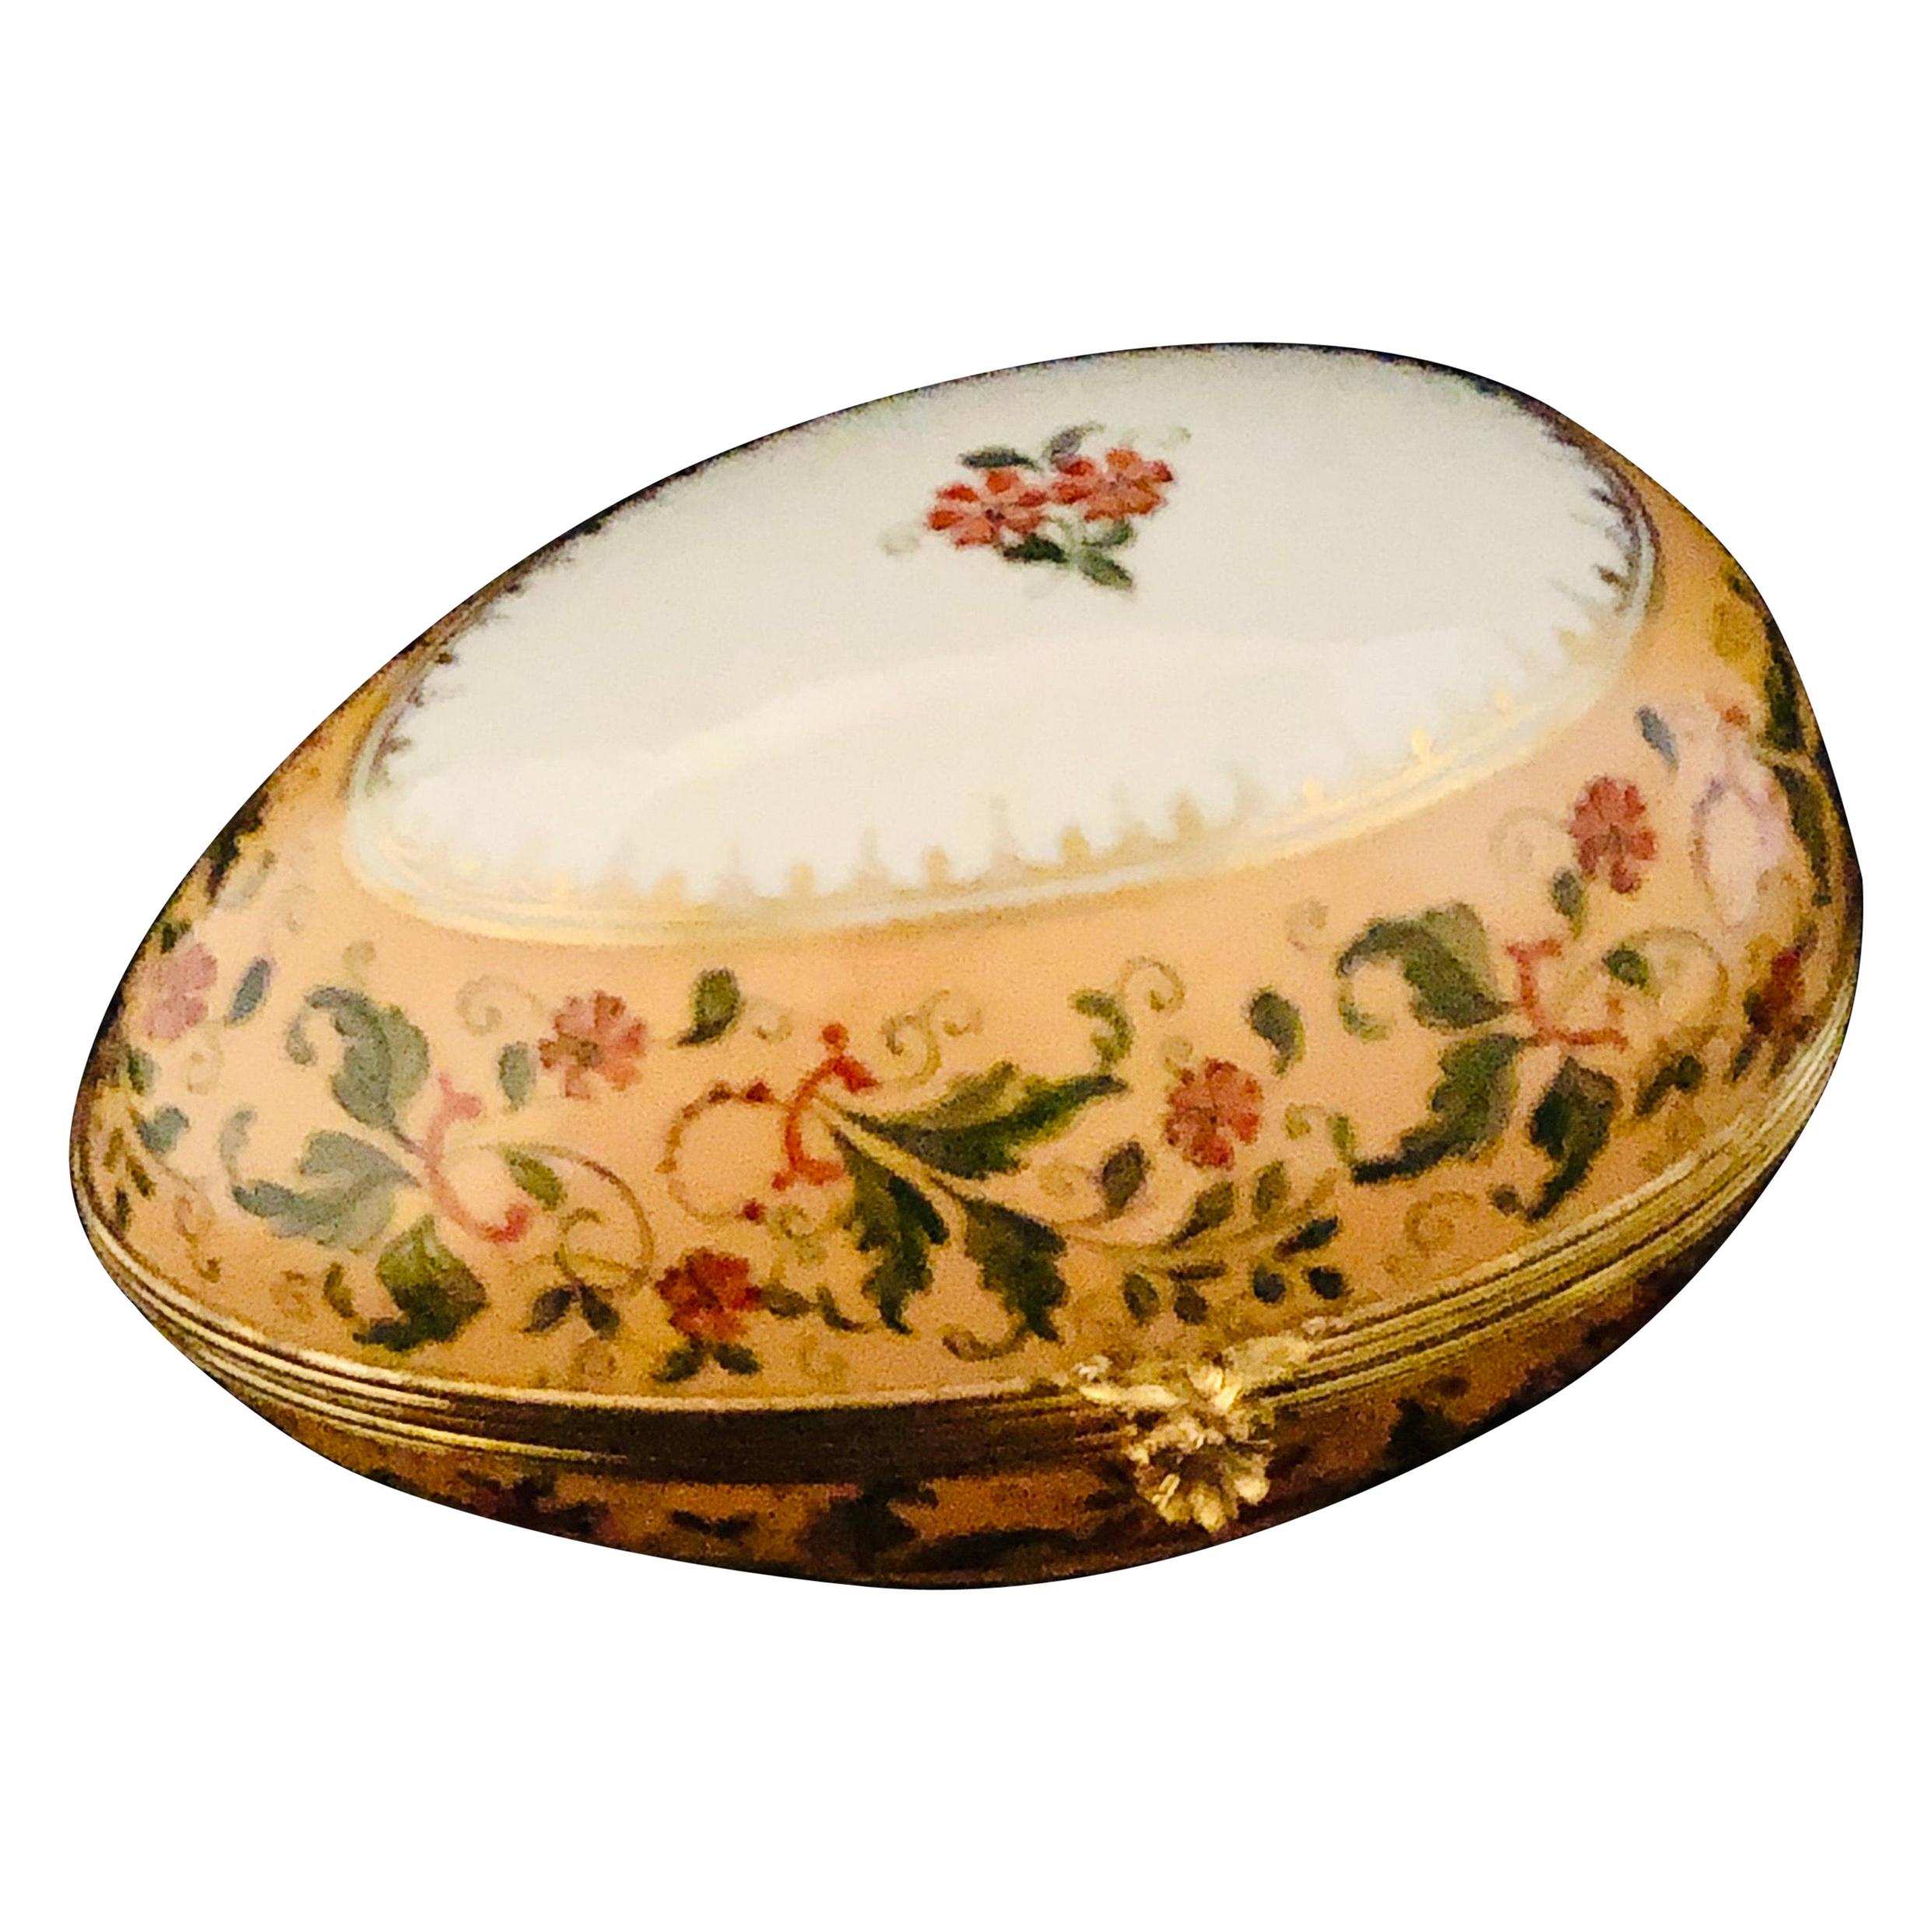 Le Tallec Peach Ground Egg Shaped Box Painted with Peach Flowers & Green Leaves